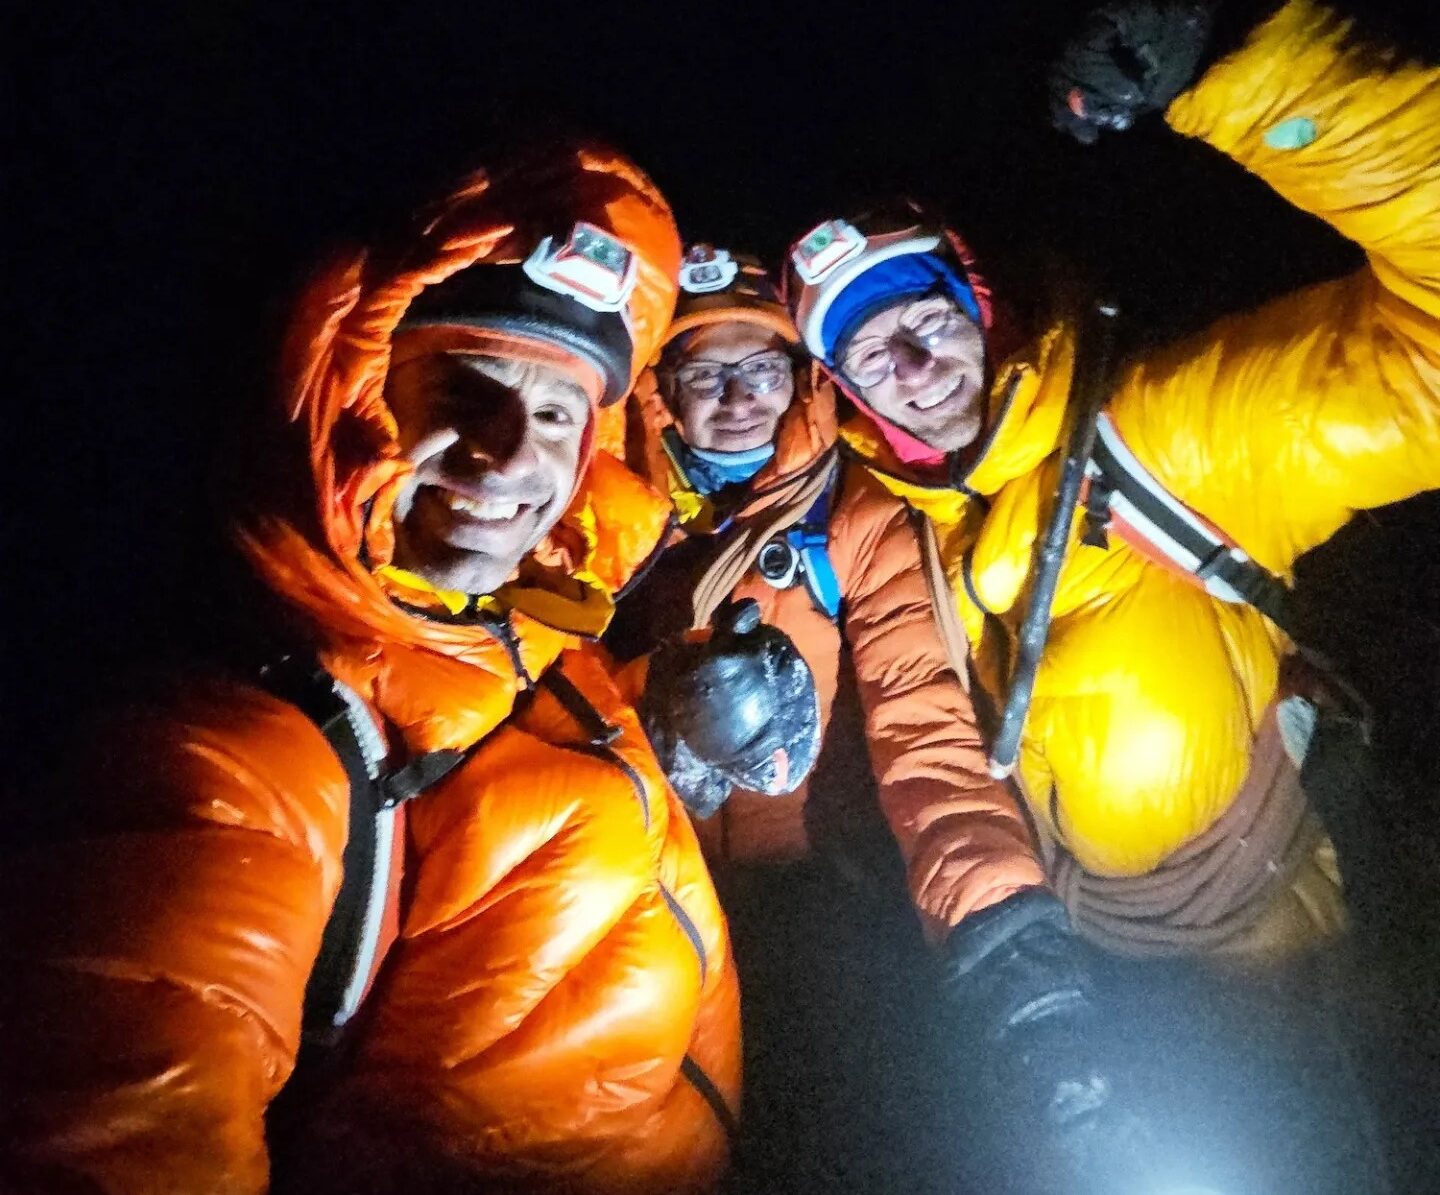 The climbers smile in full night